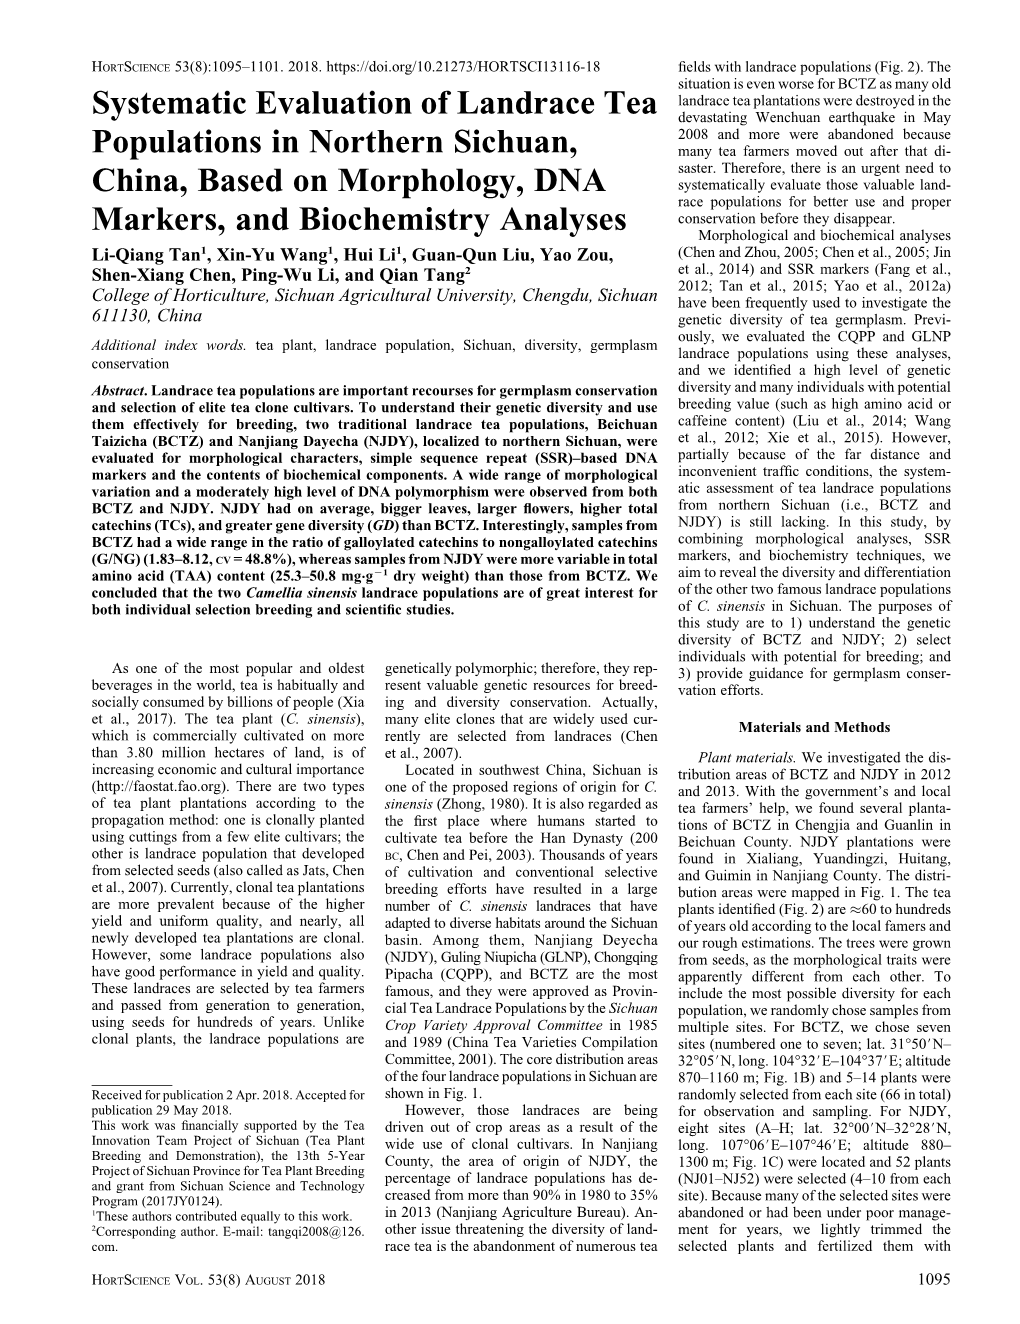 Systematic Evaluation of Landrace Tea Populations in Northern Sichuan, China, Based on Morphology, DNA Markers, and Biochemistry